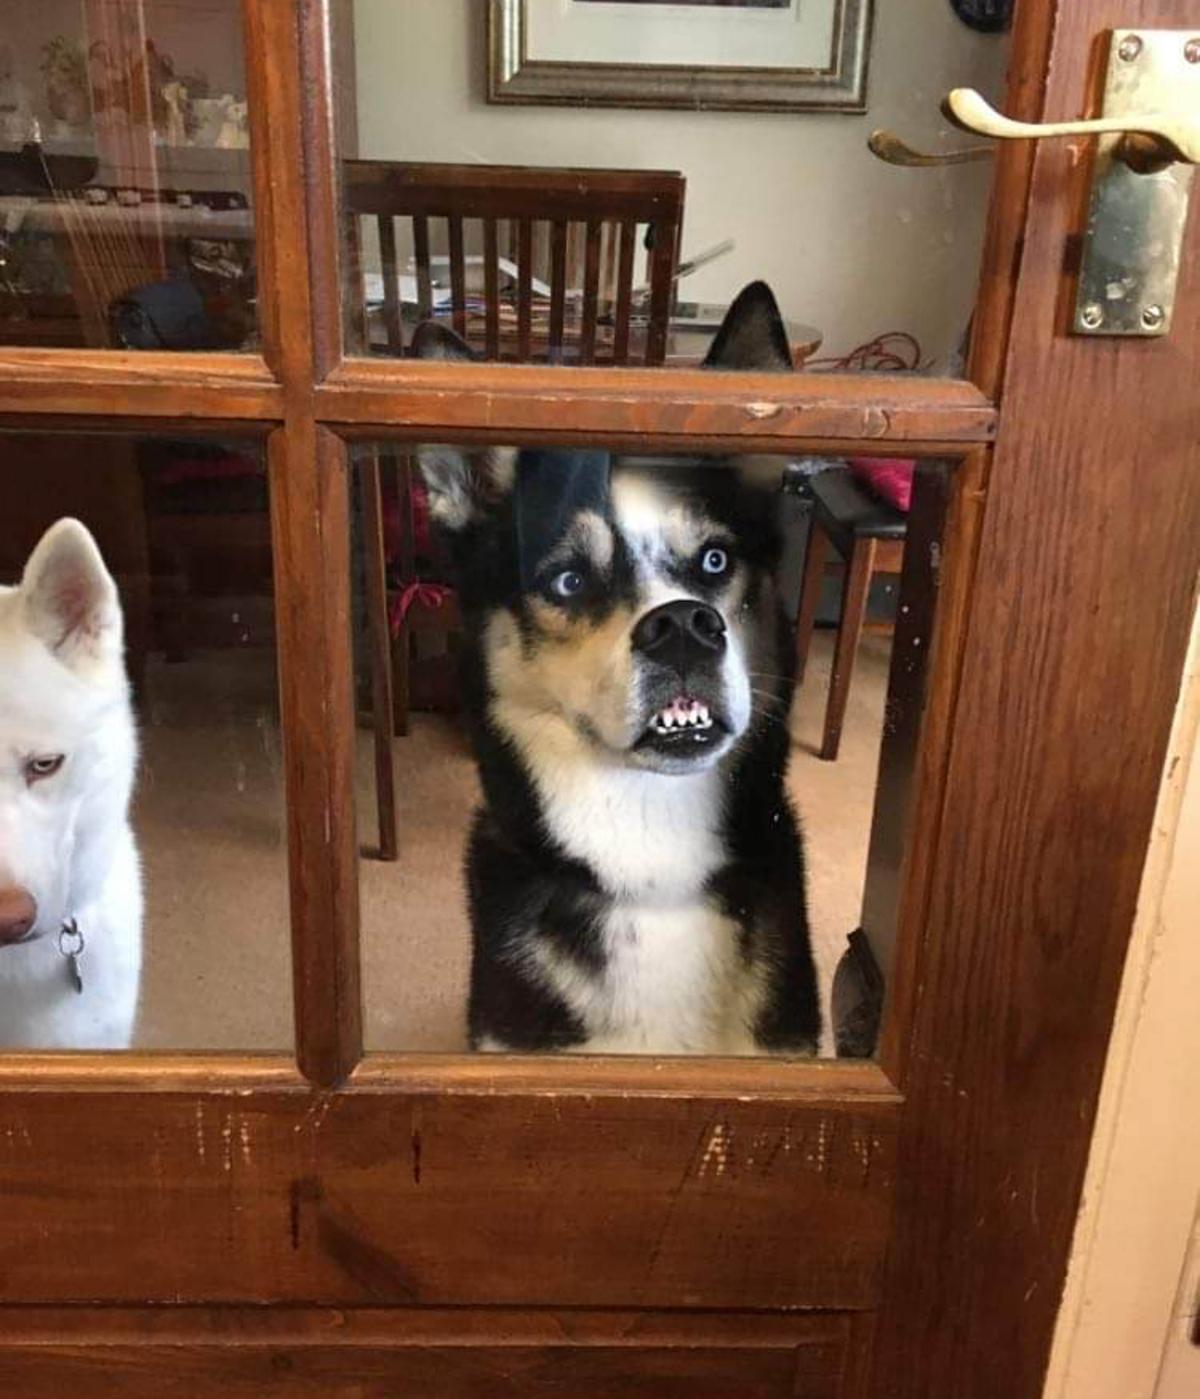 Baloo (R) making faces through the window, with his mom, Bear, looking unimpressed. (Courtesy of Caters News)